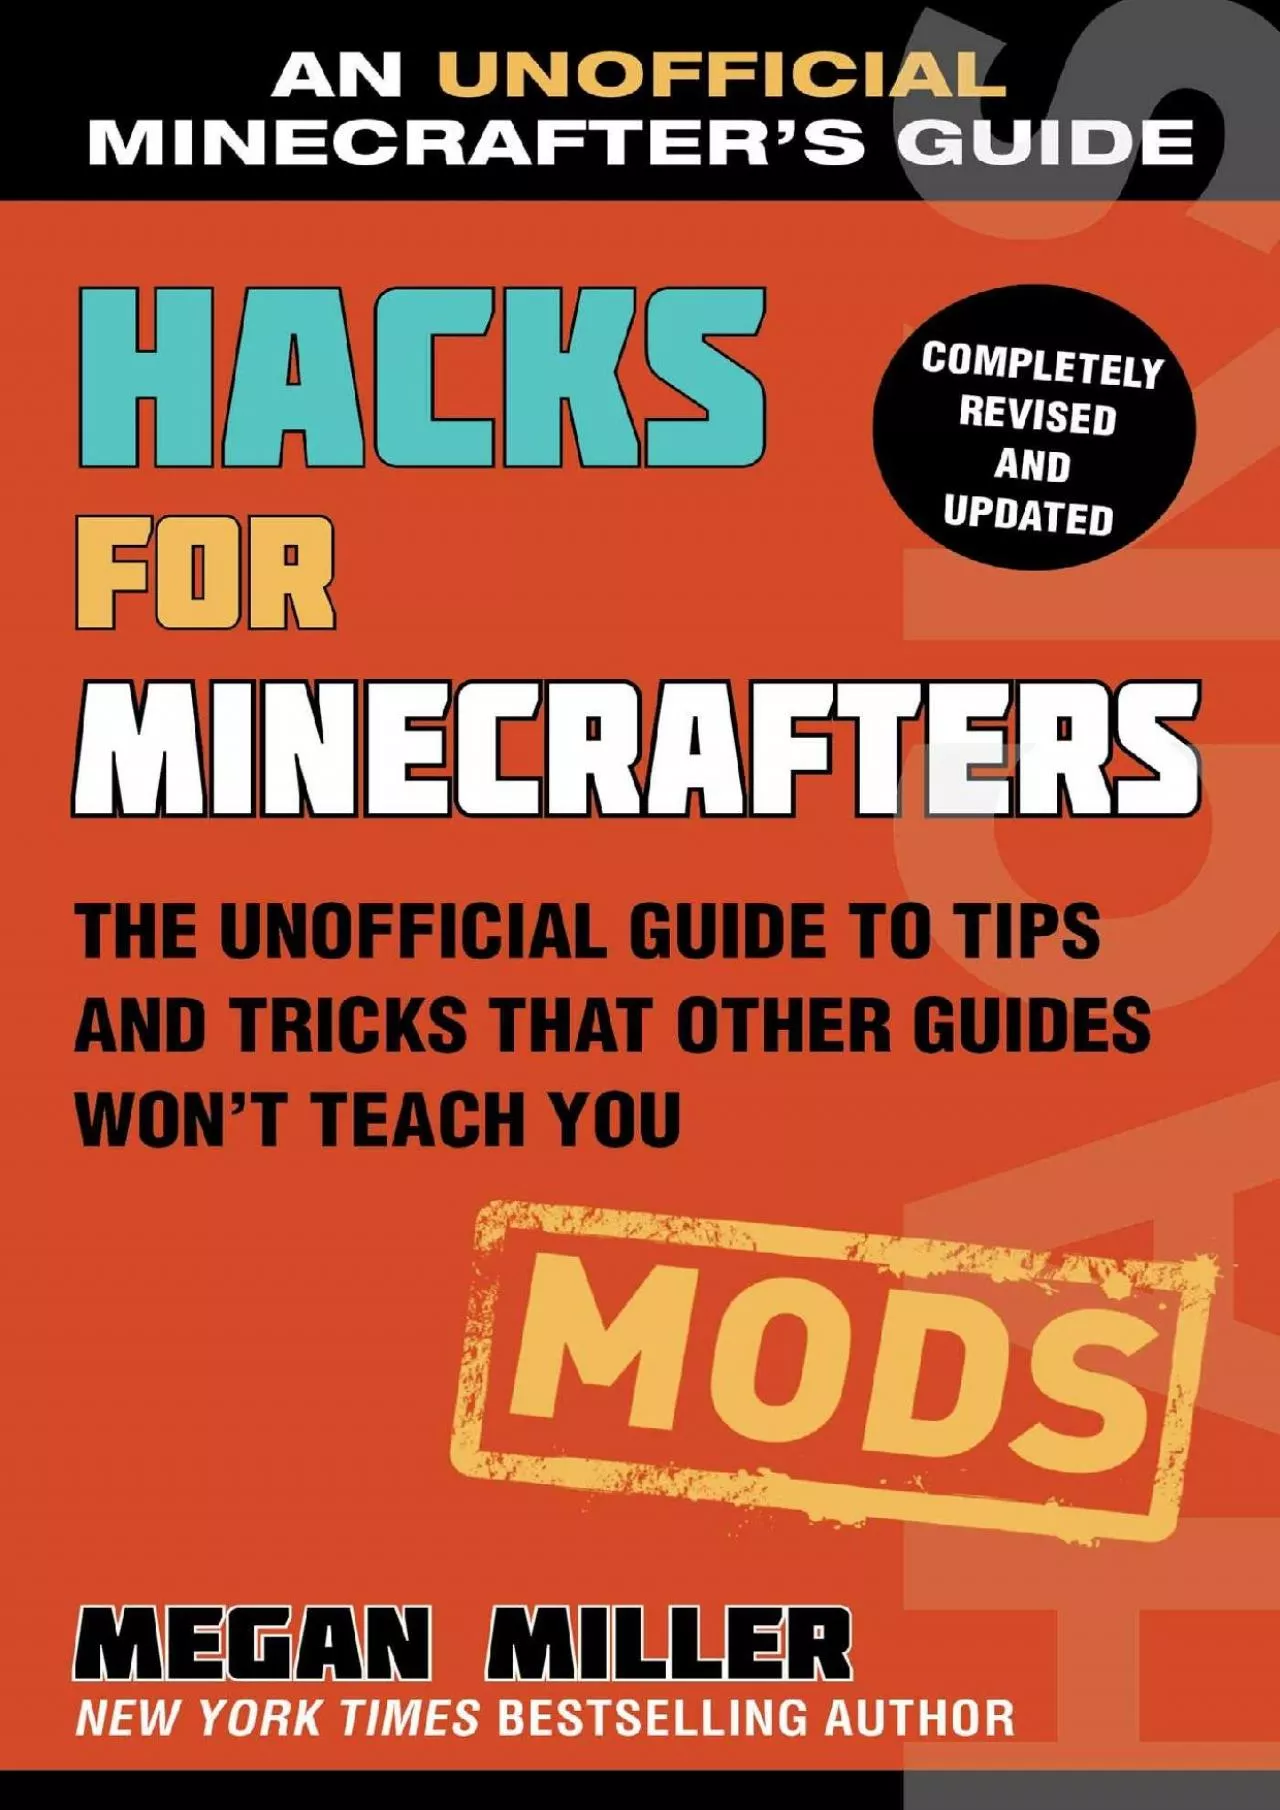 (EBOOK)-Hacks for Minecrafters: Mods: The Unofficial Guide to Tips and Tricks That Other